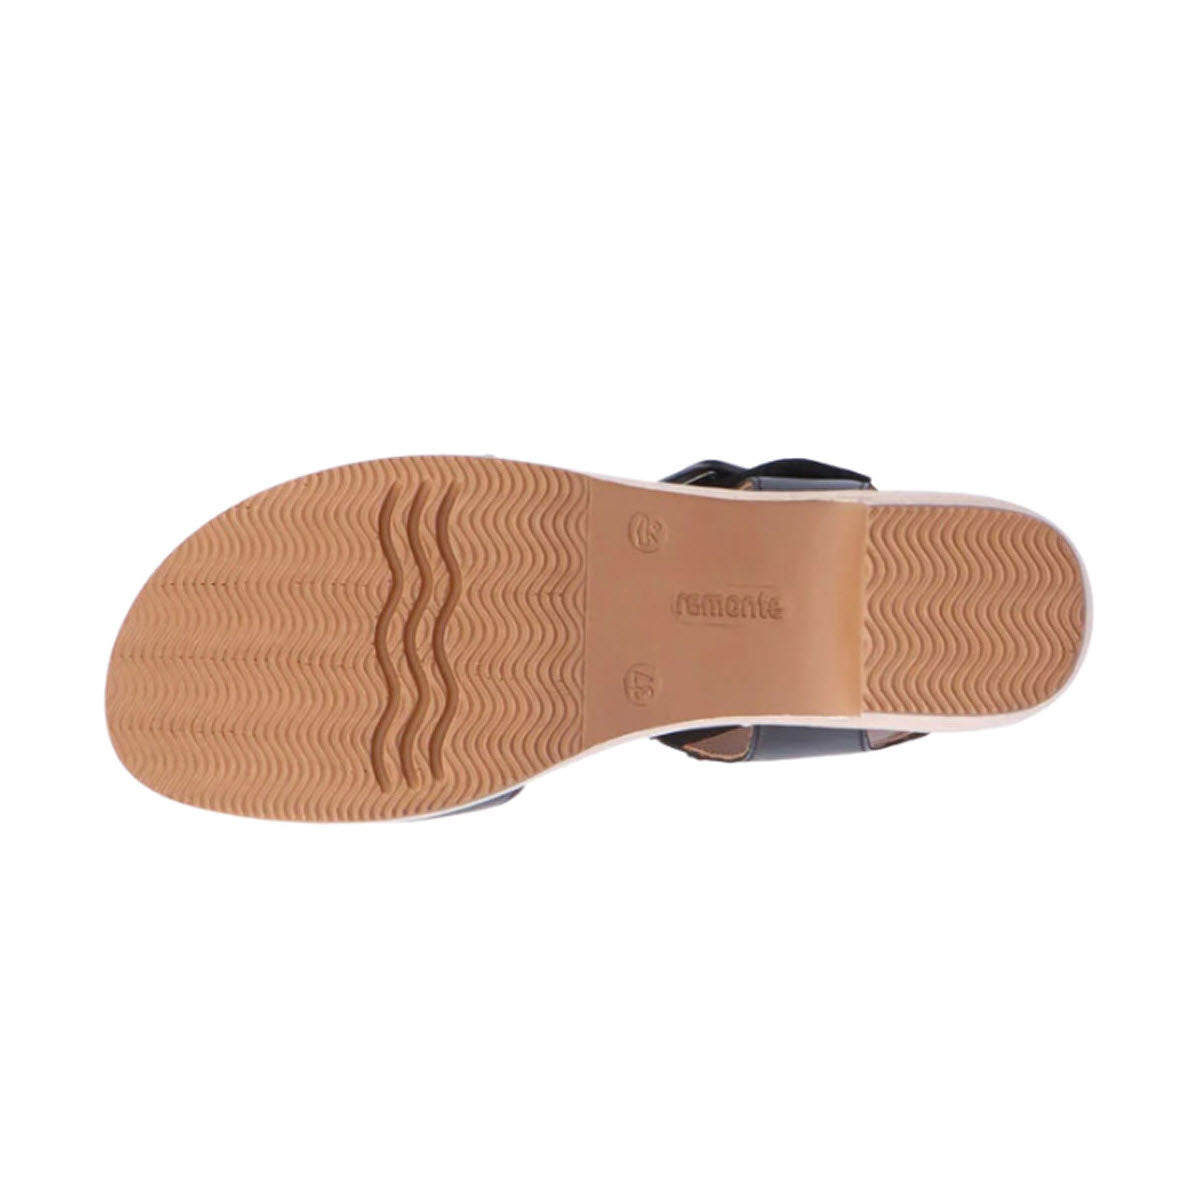 Bottom view of the REMONTE BLOCK HEEL SANDAL BLACK - WOMENS showing the sole with wavy tread patterns, and the word &quot;remonte&quot; embossed on the light brown sole. The shoe features a leather upper and adjustable straps for a comfortable fit.